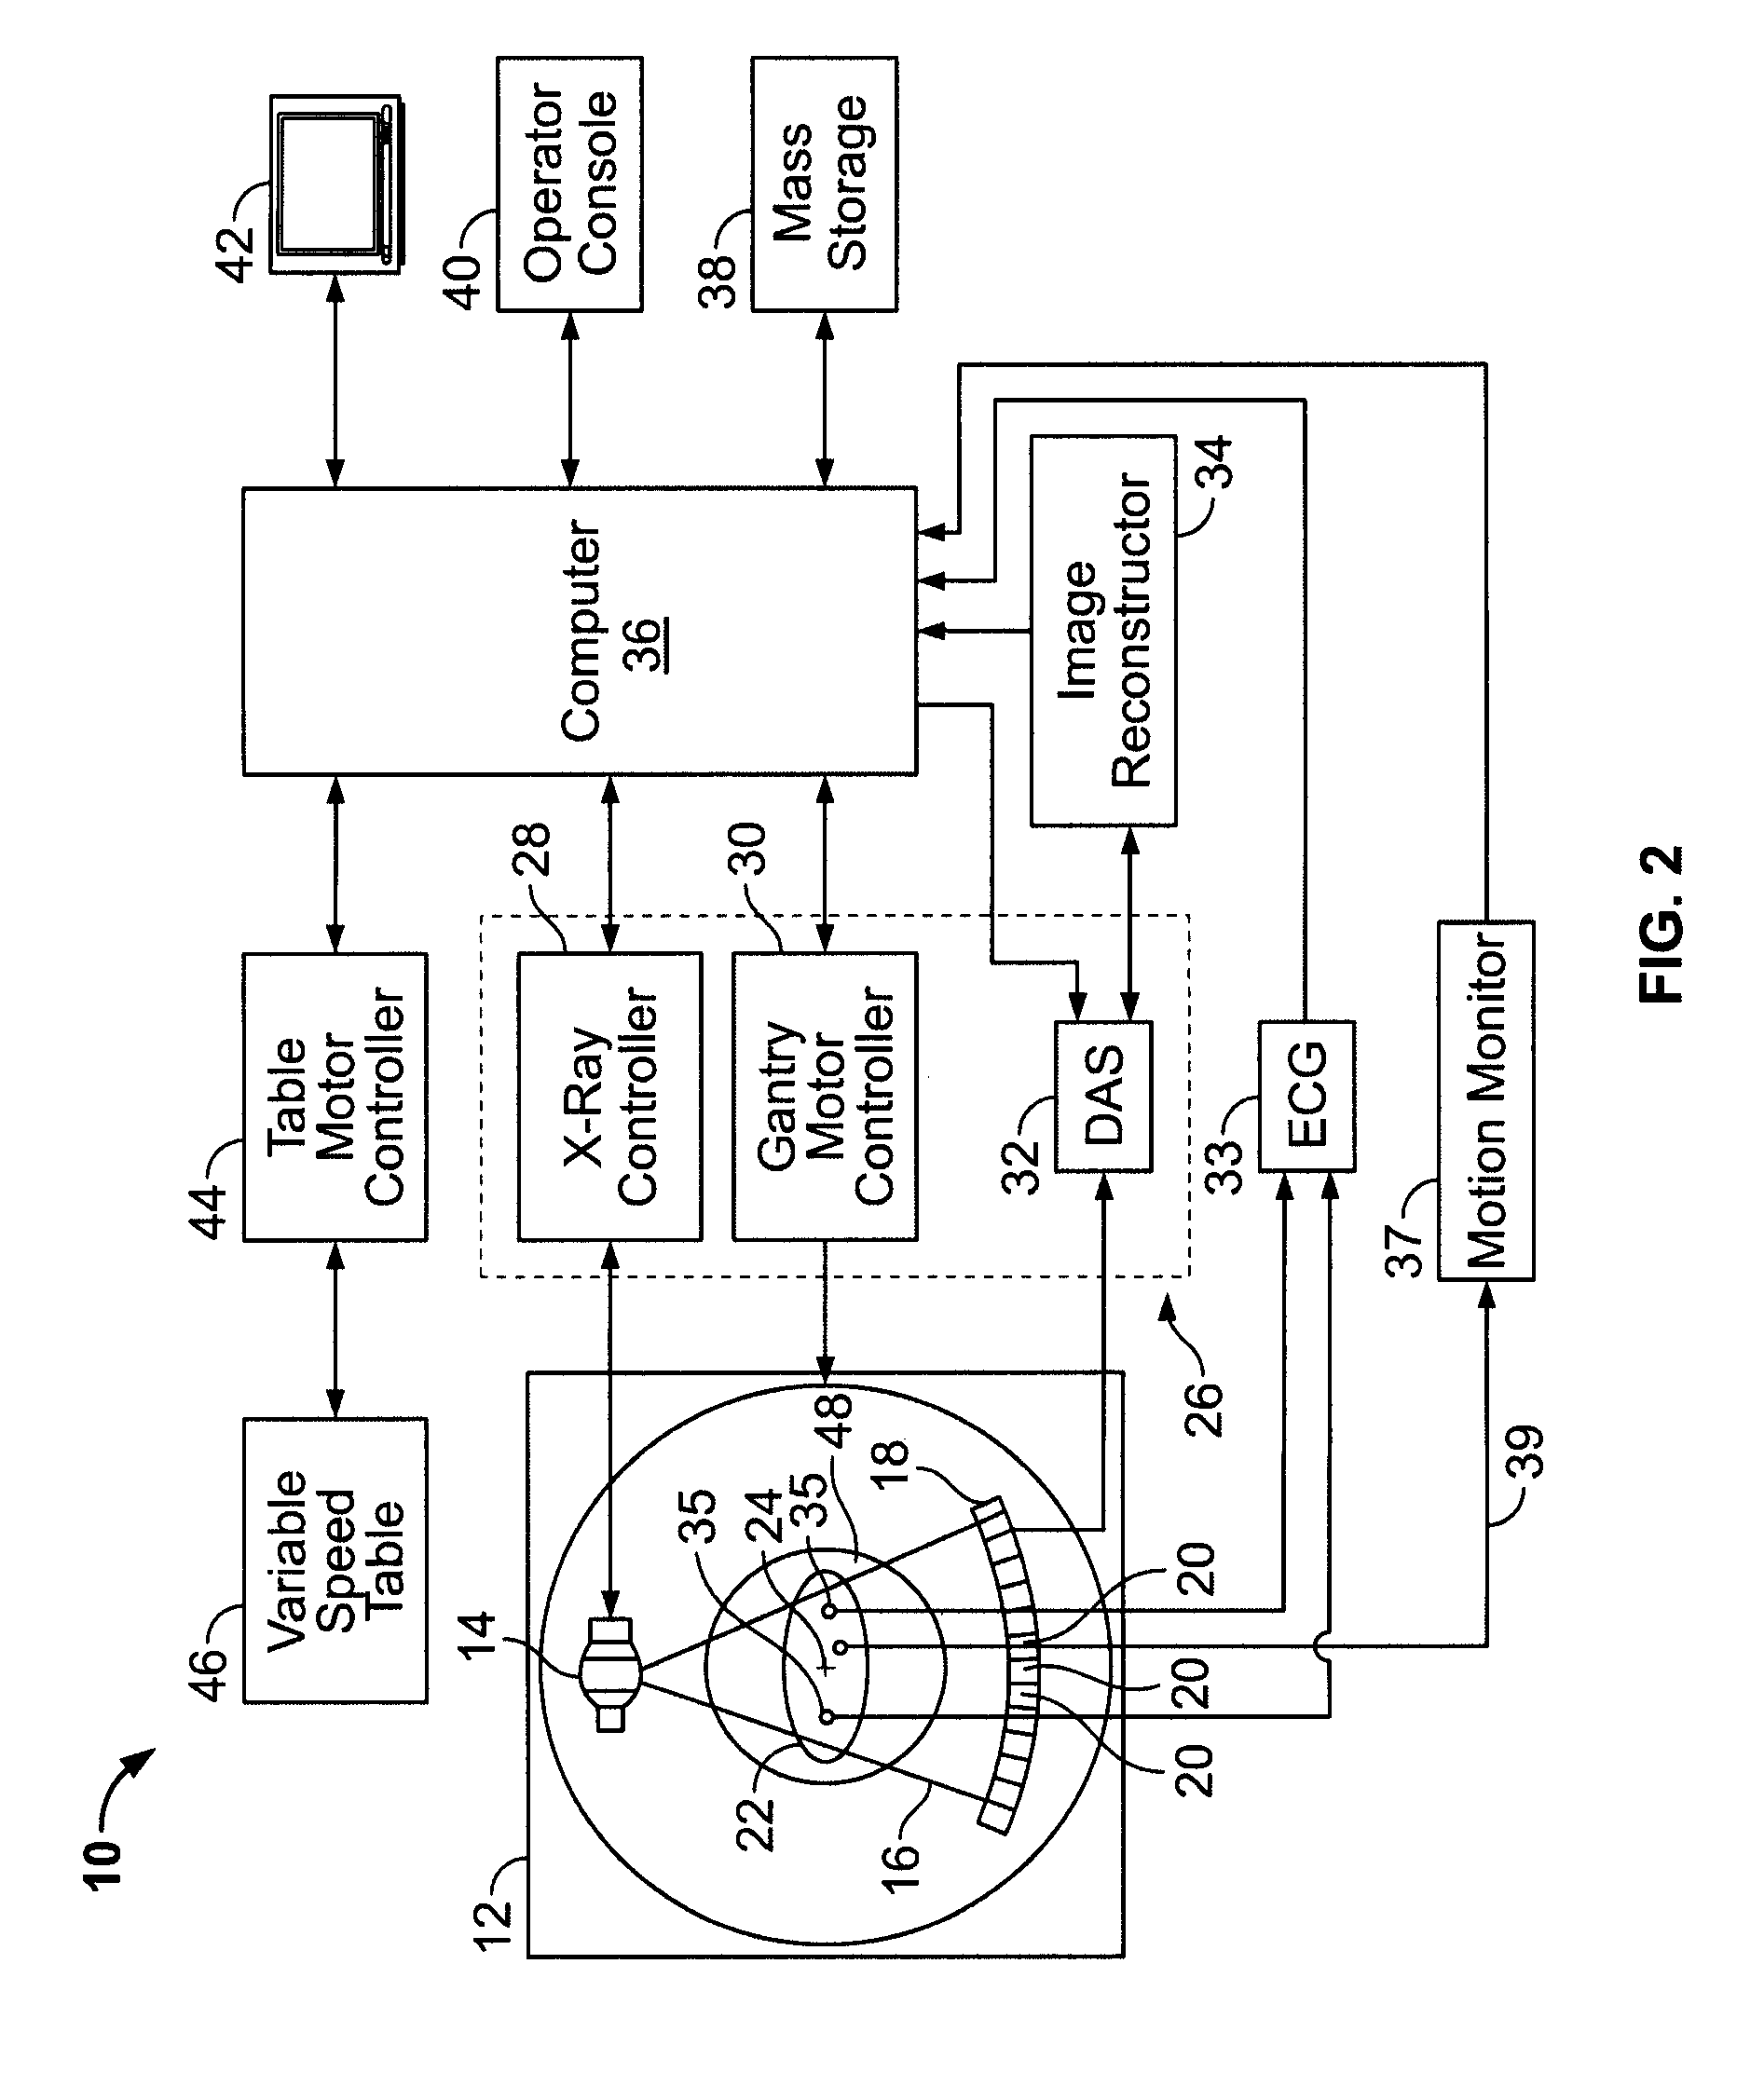 Method and apparatus for reconstructing images of moving structures based on motion cycle temporal data